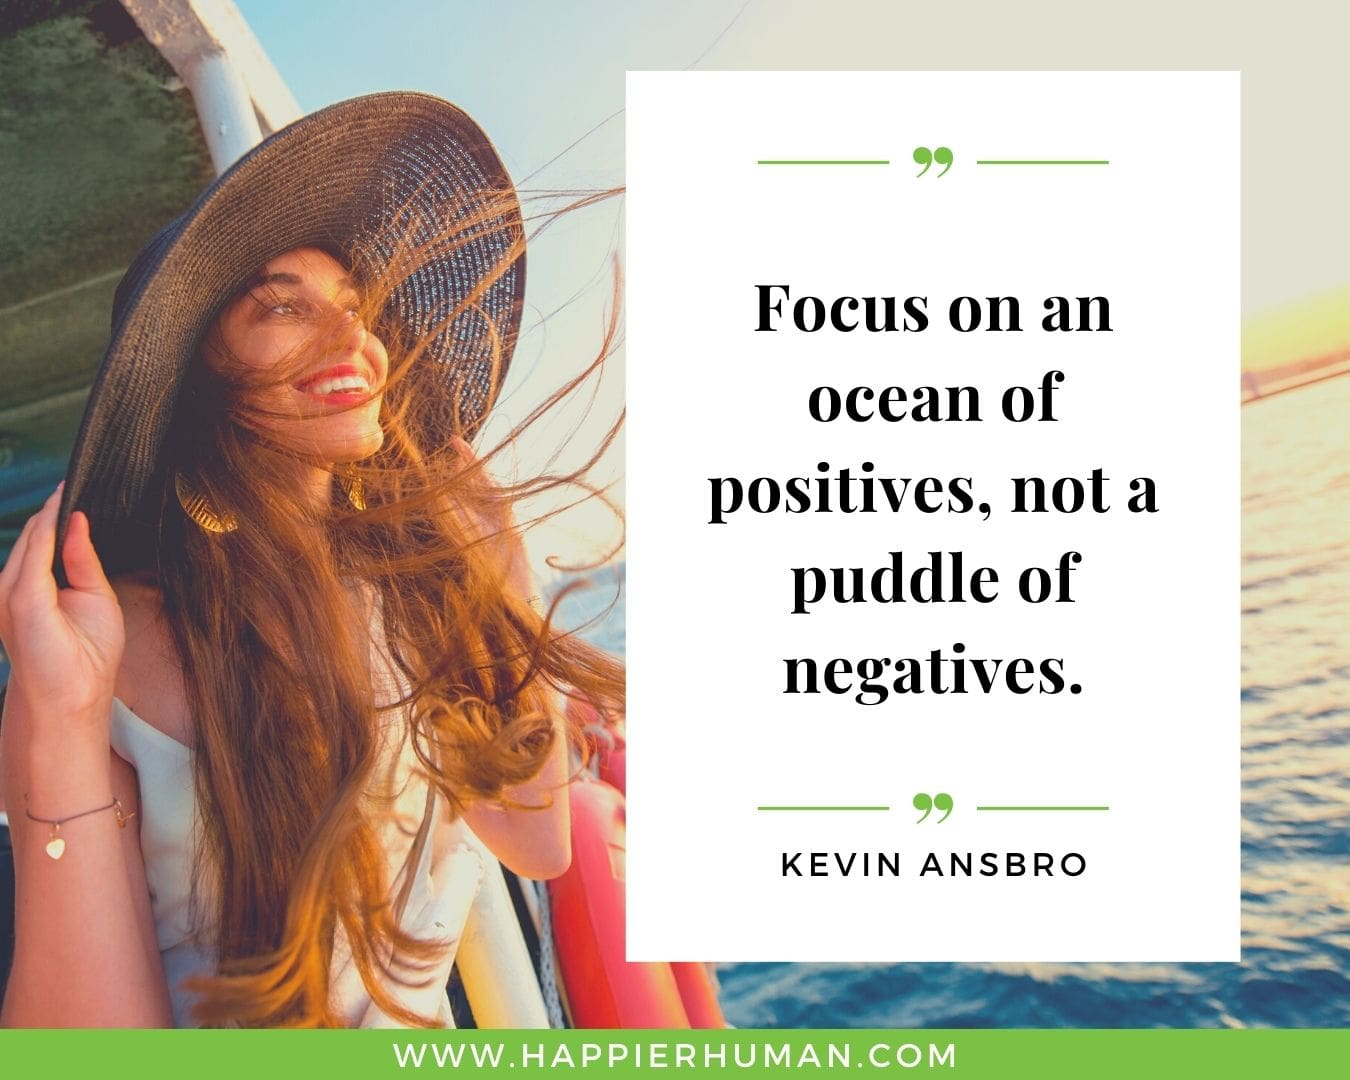 Positive Energy Quotes - “Focus on an ocean of positives, not a puddle of negatives.” - Kevin Ansbro